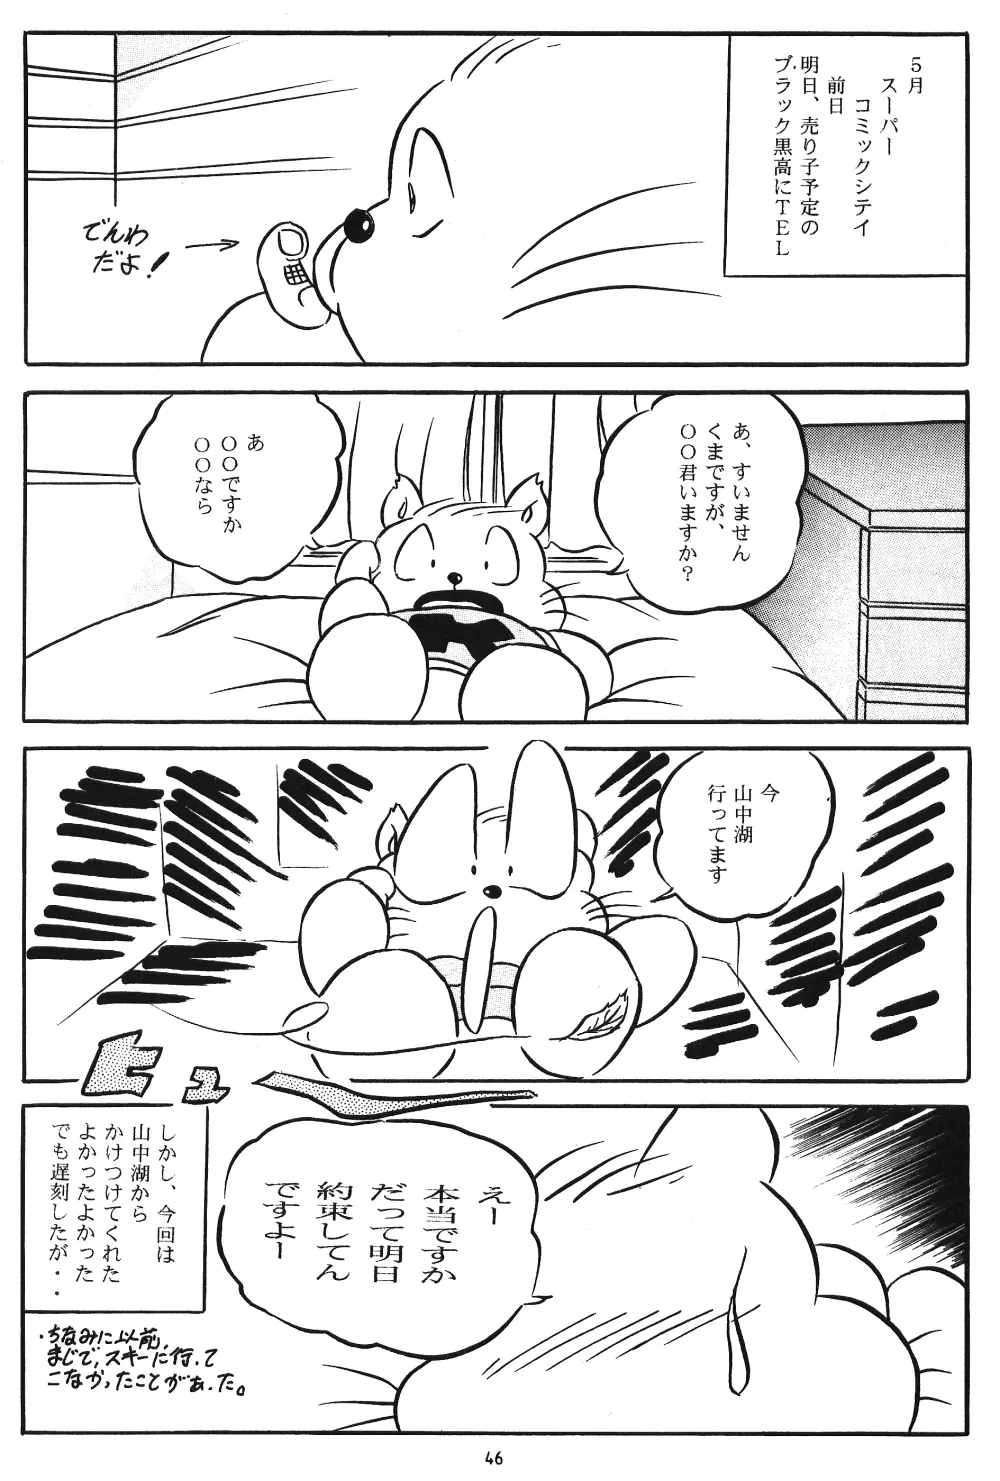 C-COMPANY SPECIAL STAGE 14 Page.47